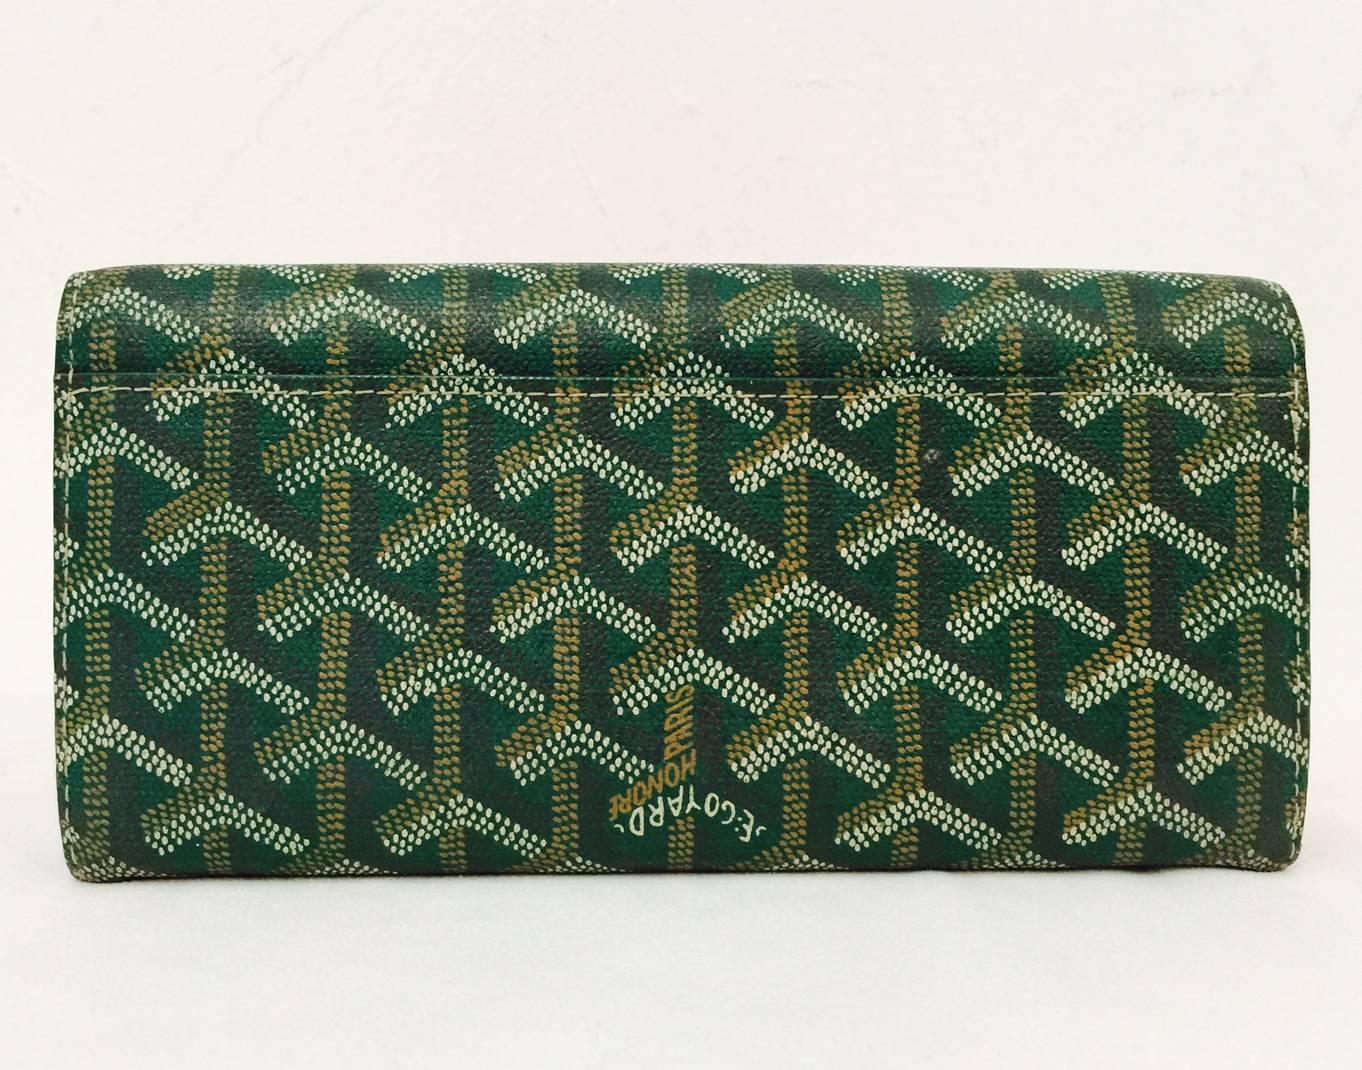 The undeniable quality and construction of Goyard's product lines illustrates why this house's history extends to the late 18th Century!  This luxurious wallet is crafted from signature Green multicolor hand-painted Goyardine coated canvas and has